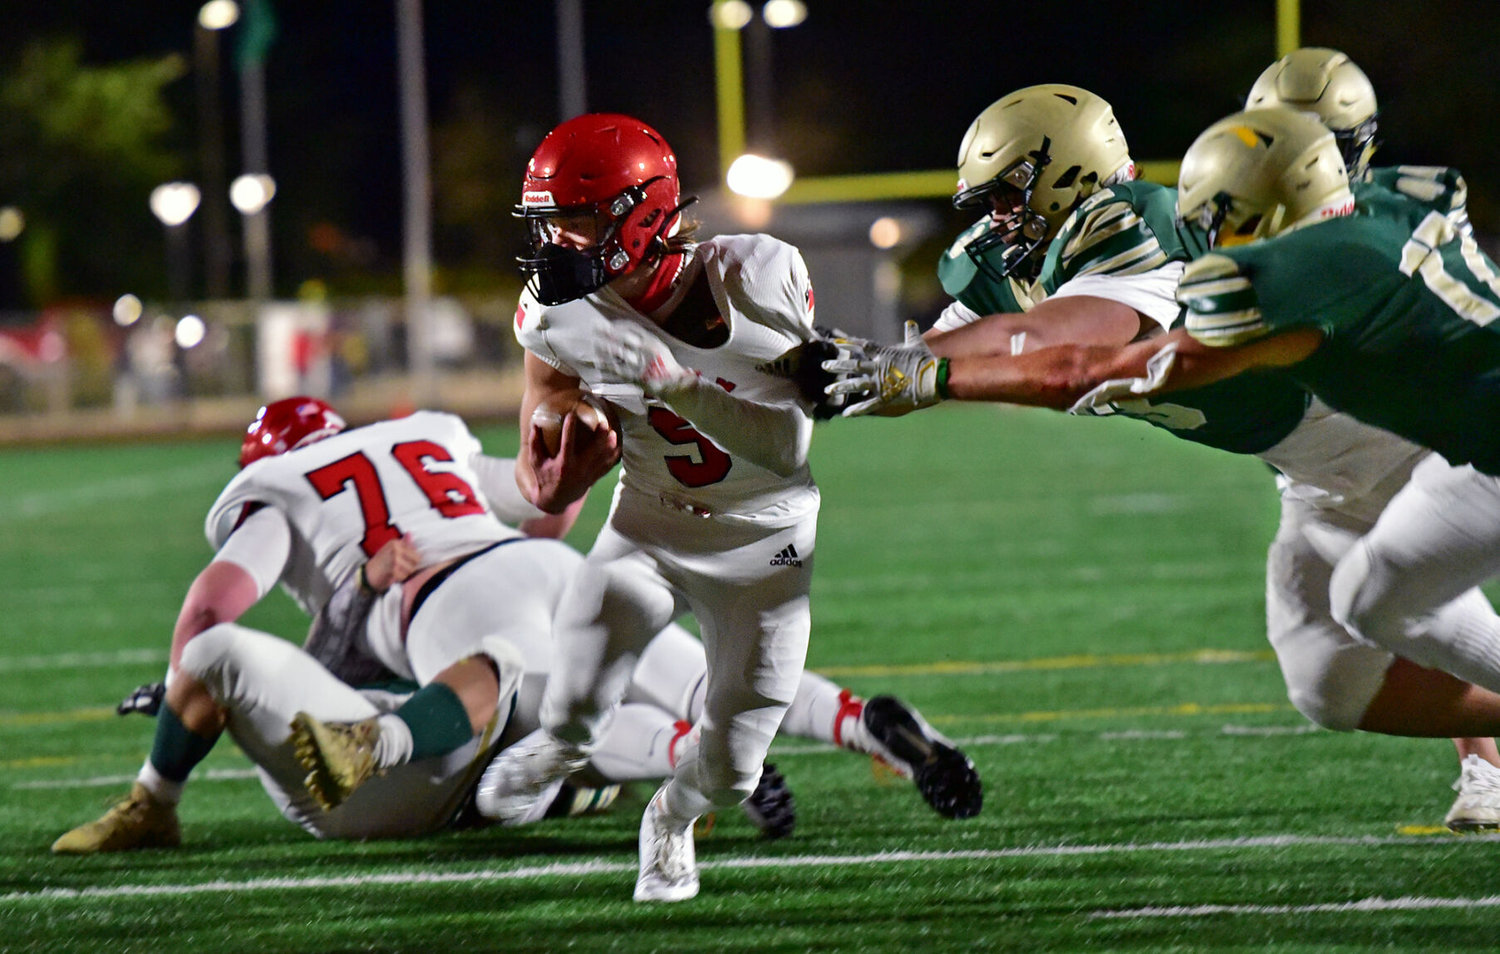 With a huge assist from teammate Dylan Jemtegaard, 76, Yelm High School’s Kyler Ronquillo scores a touchdown on Friday, March 12, against Timberline High School at South Sound Stadium.